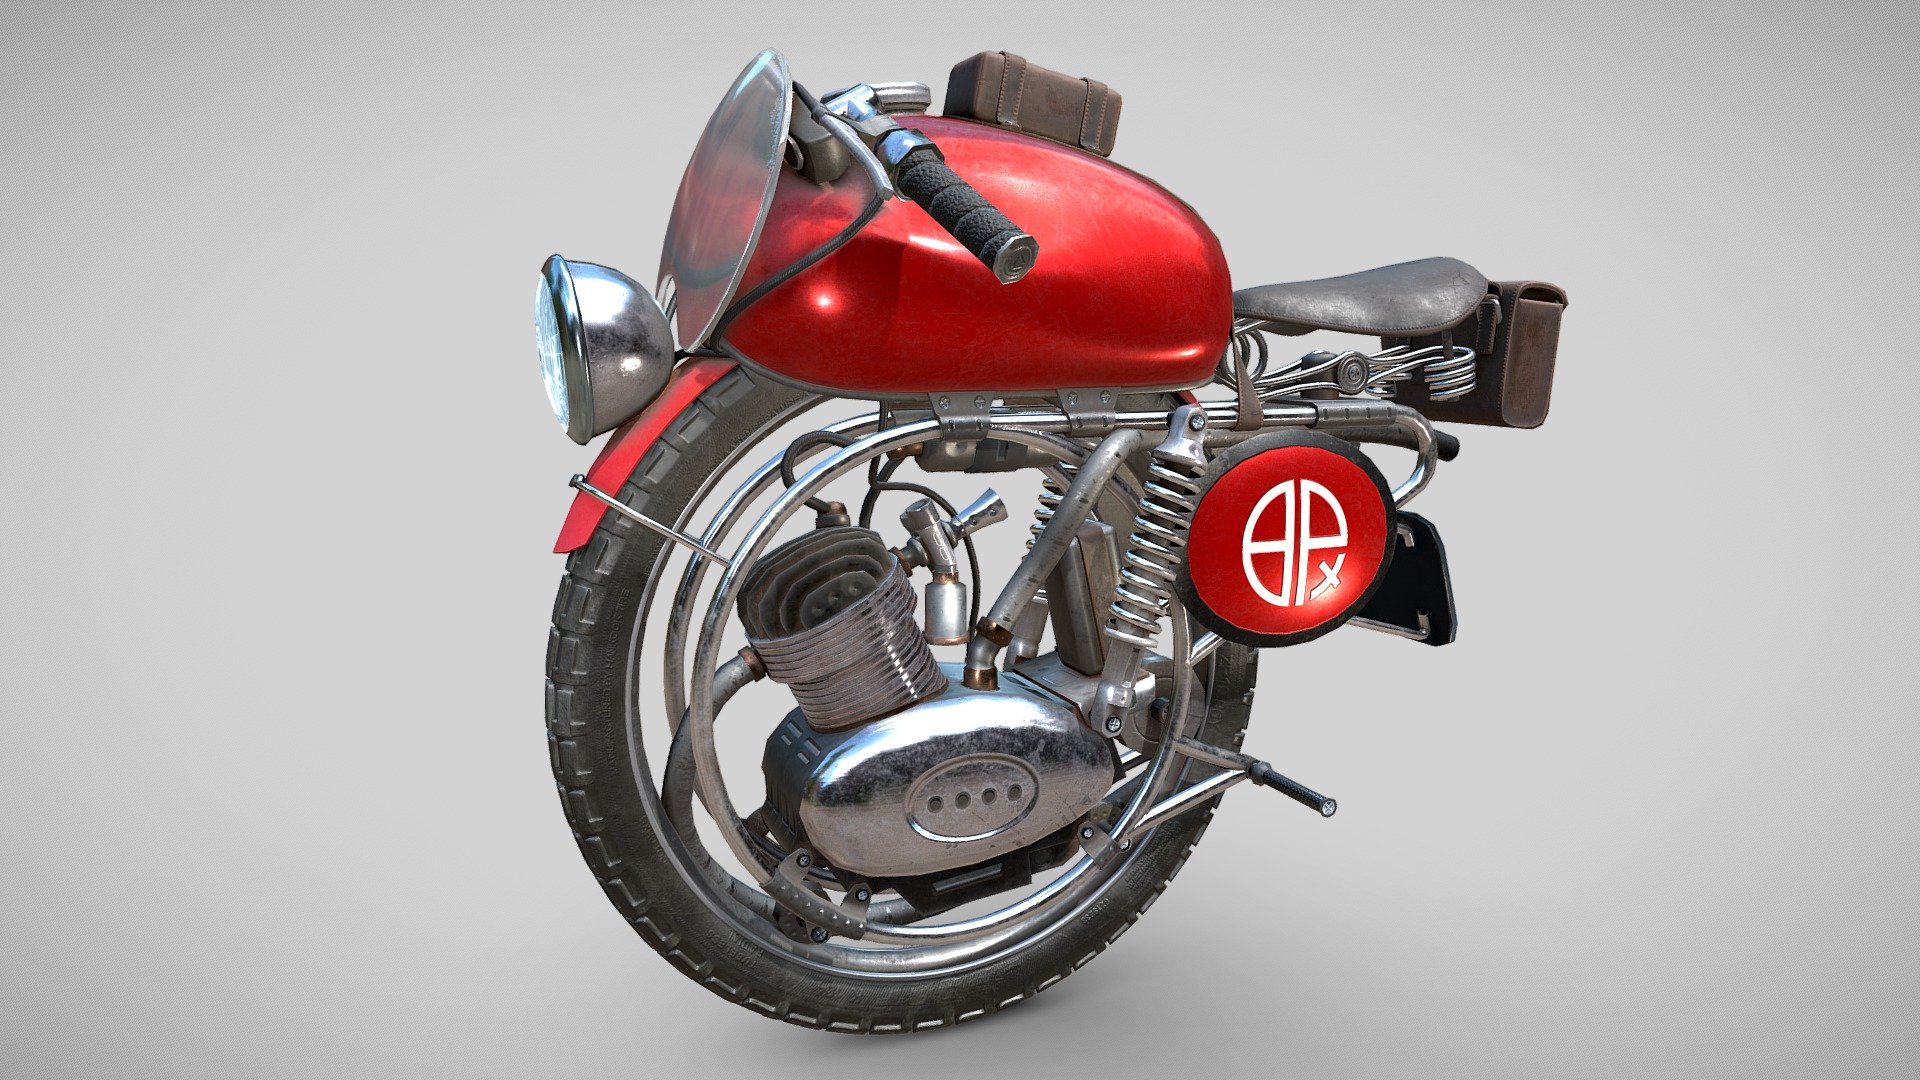 Based on Monobike (UV Fix) by Warkarma, Monobike by romullus, and Motowheel by Costr (Viverna), licensed under CC-Attribution.

Here is my participation in the Texturing Challenge, I wanted to give a new taste to this monobike, with a retro style and a nice red color. Hope you will like this textured model.

&mdash;Xbp28&mdash; - Monobike Red Speed - Download Free 3D model by Pegeault baptiste (@xbp28) 3d model